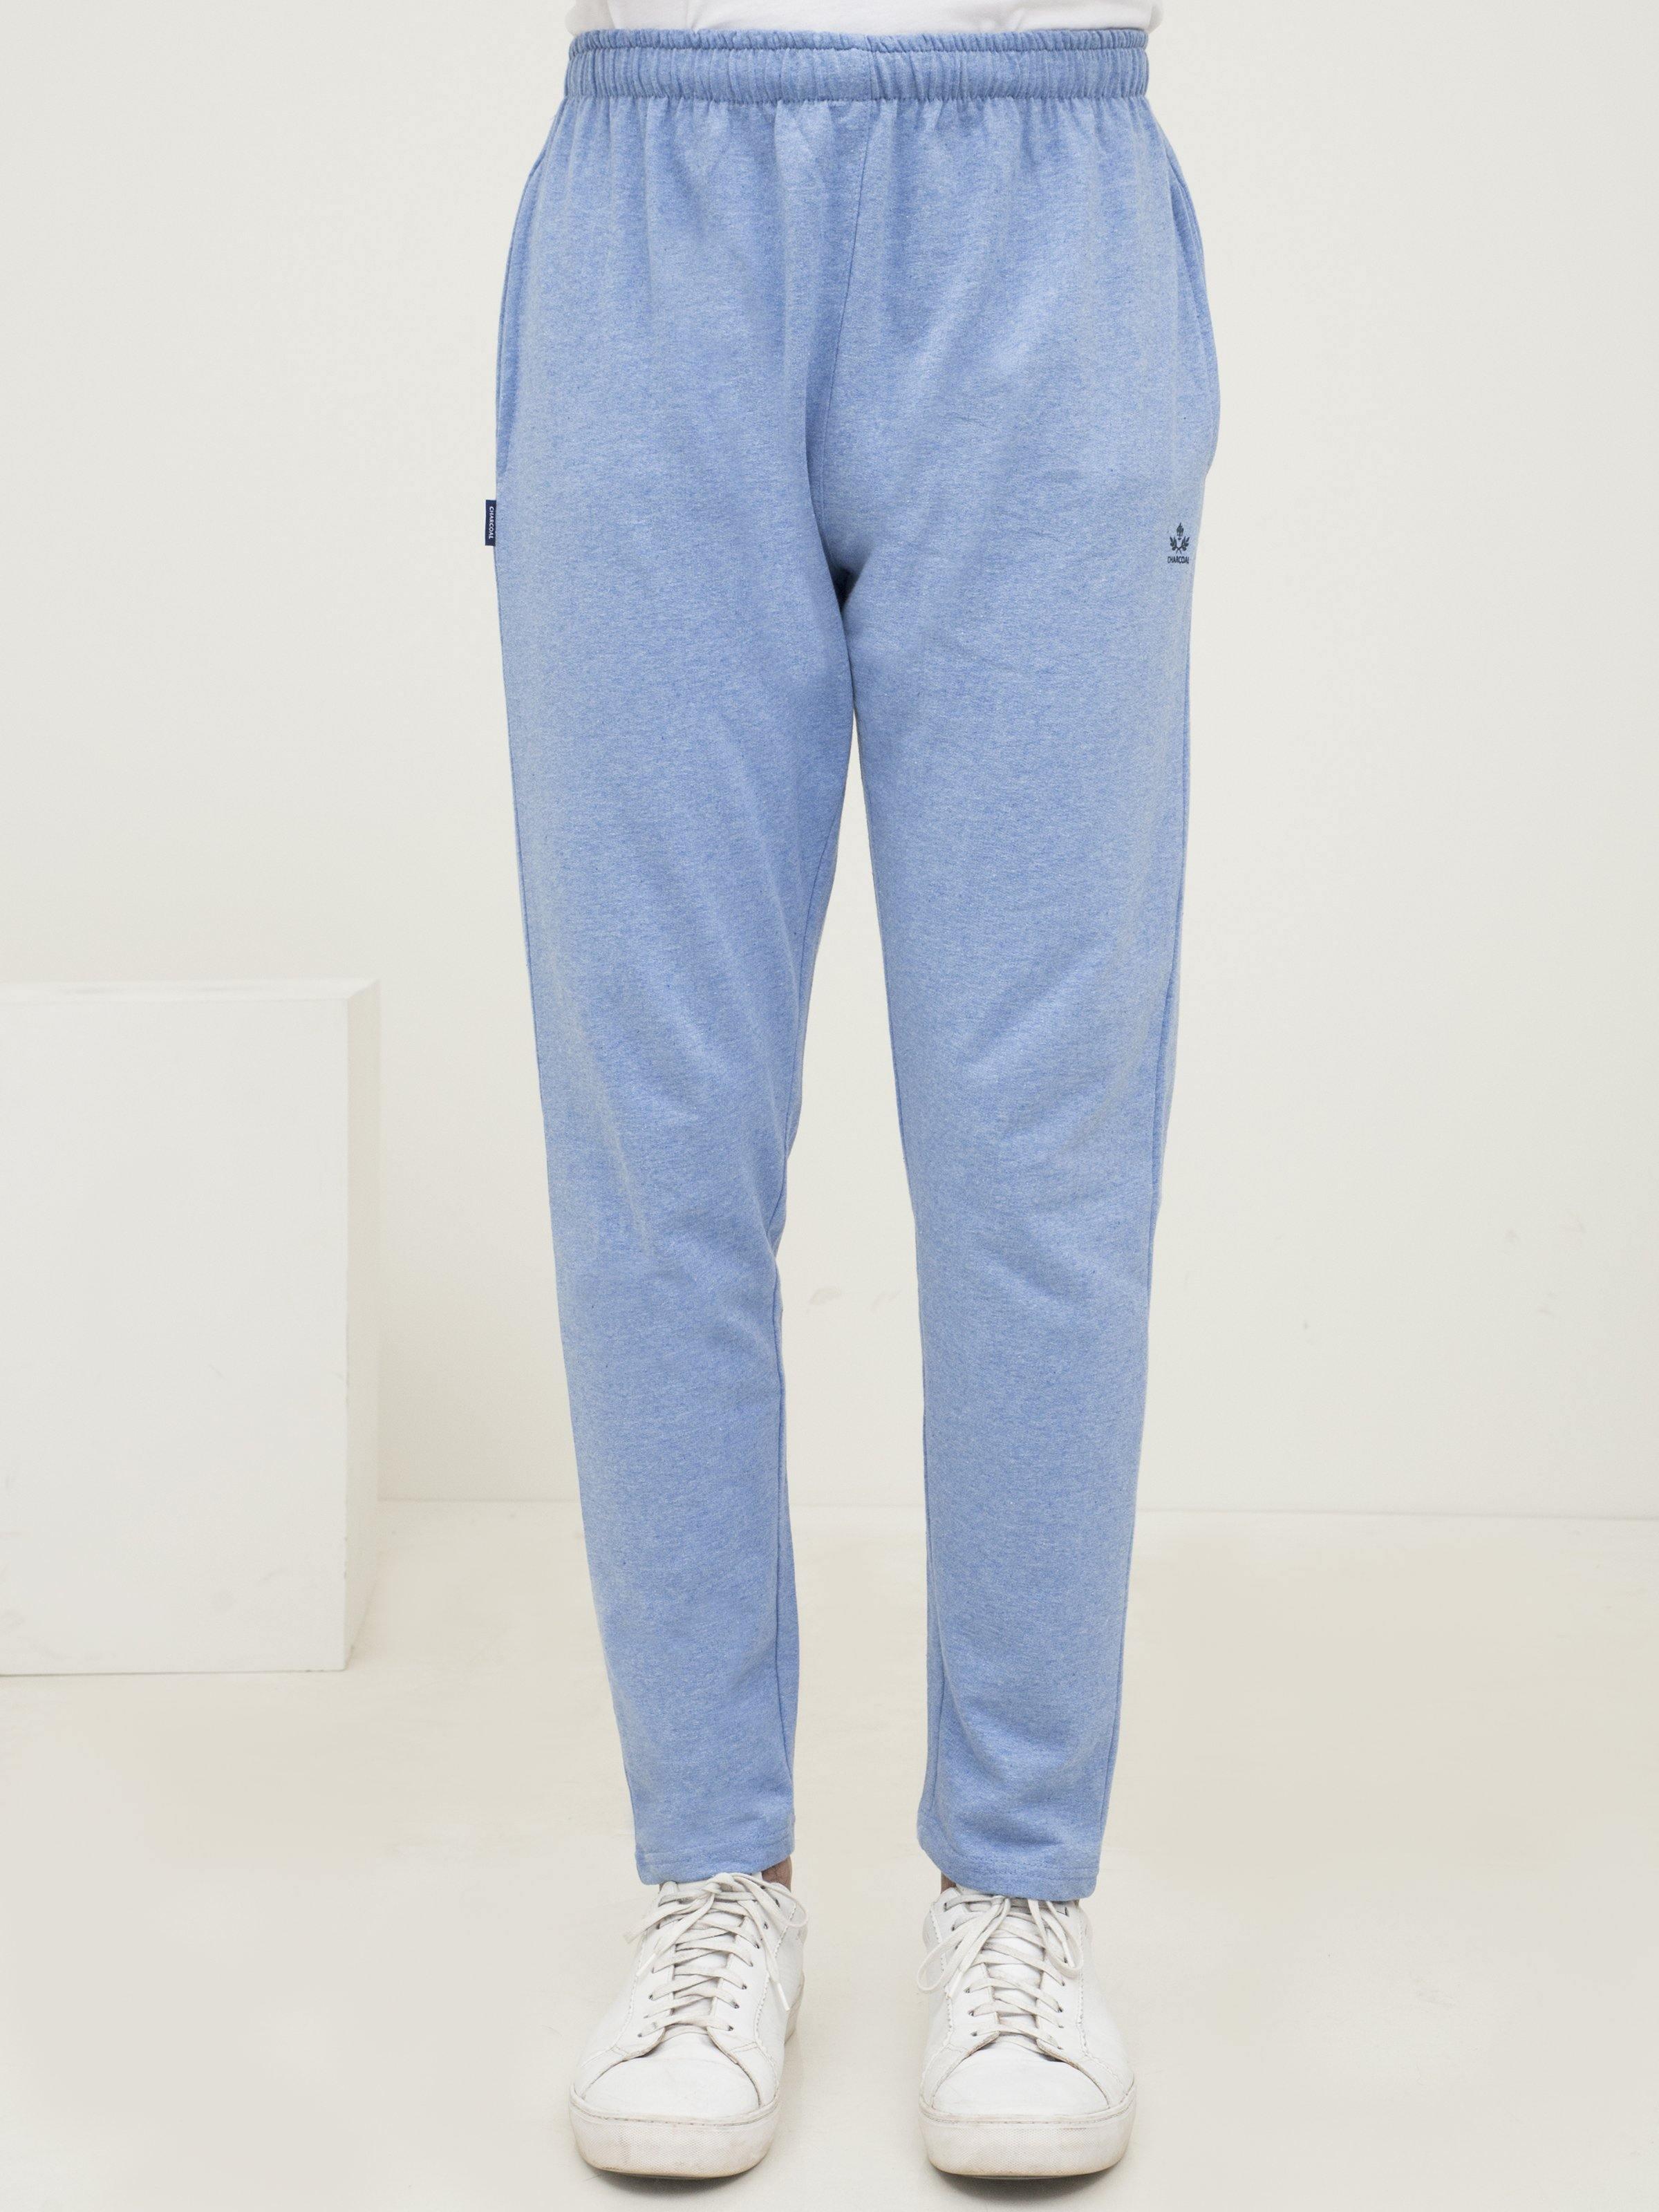 CASUAL TROUSER KNITE SLEEPWEAR SEA BLUE at Charcoal Clothing